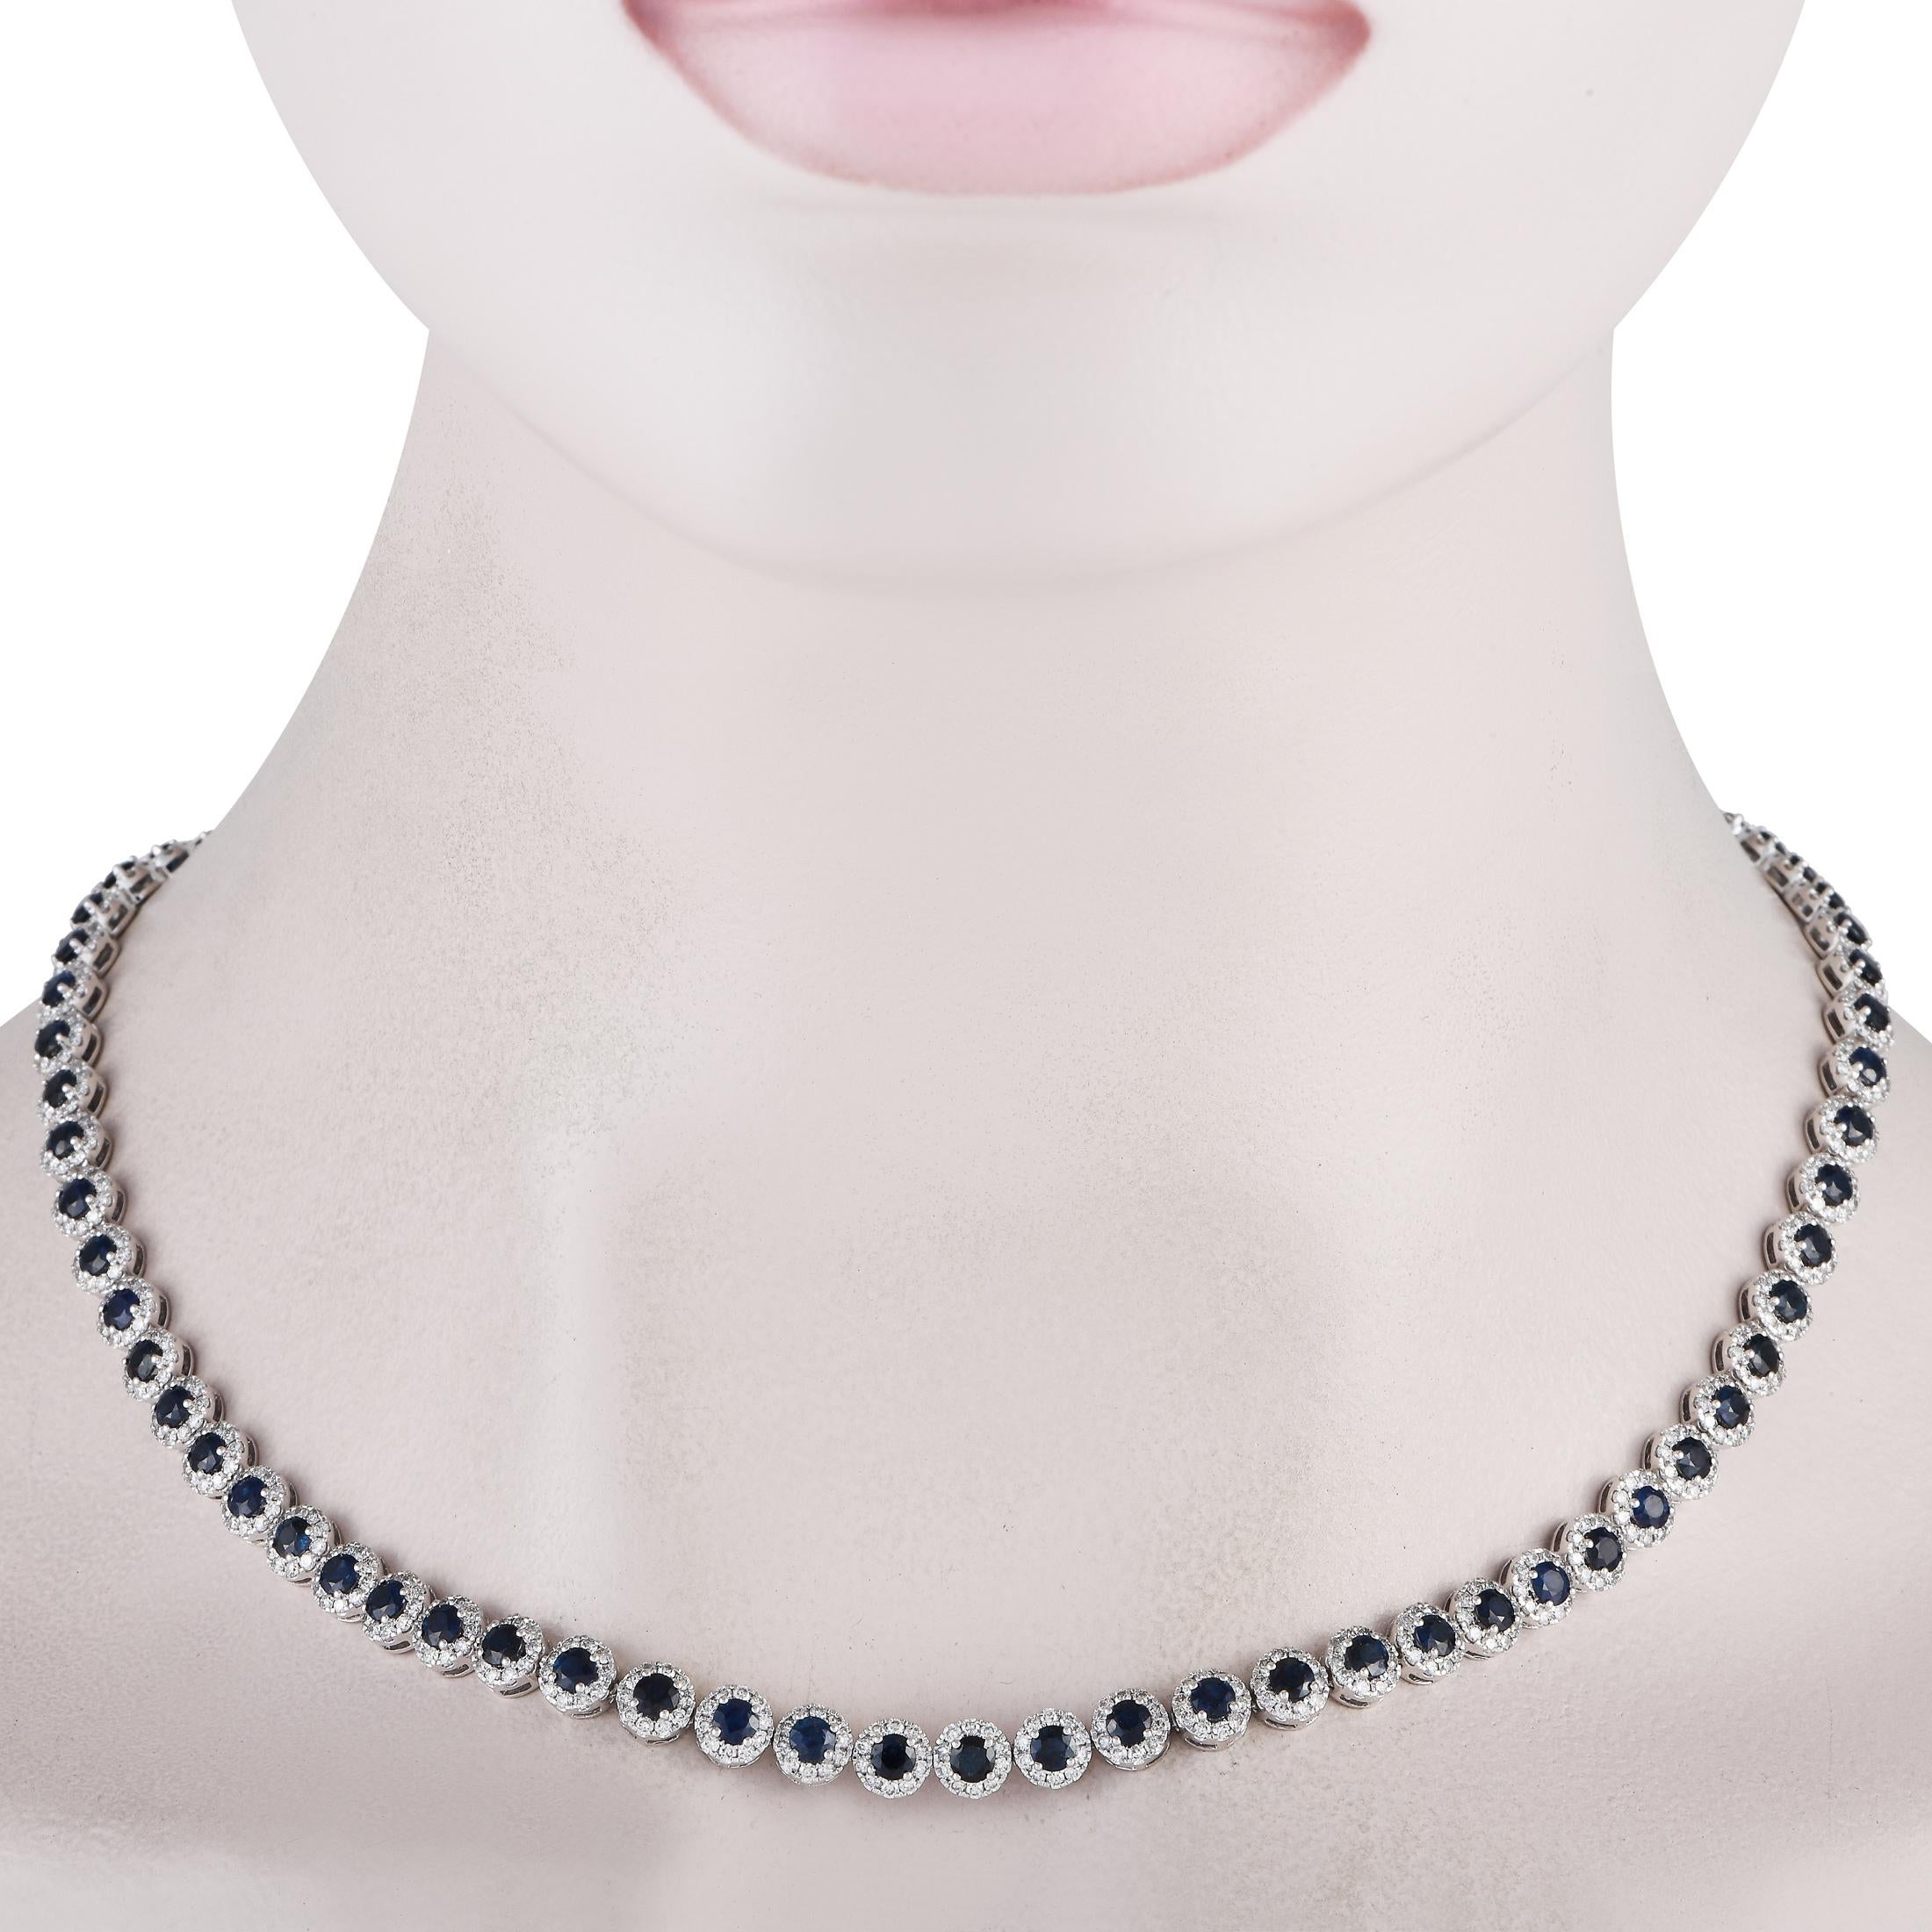 A series of round-cut sapphires with a total weight of 13.50 carats add color and dimension to this simple, elegant necklace. Crafted from shimmering 14K White Gold, each sapphire stone is accented by a halo of diamond accents that together possess